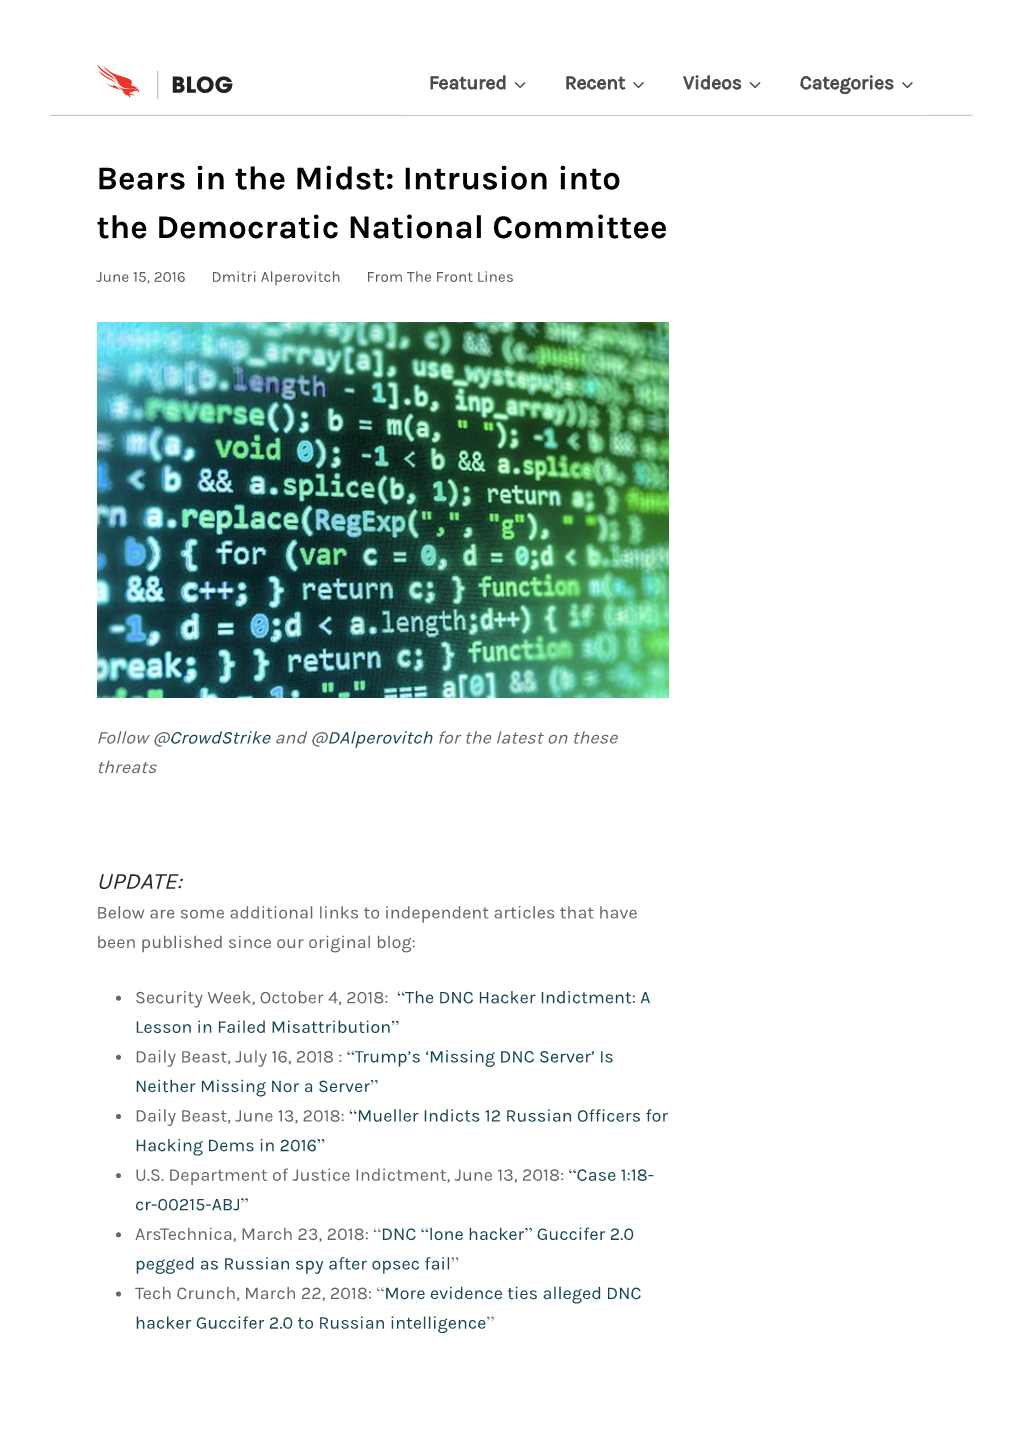 Intrusion Into the Democratic National Committee